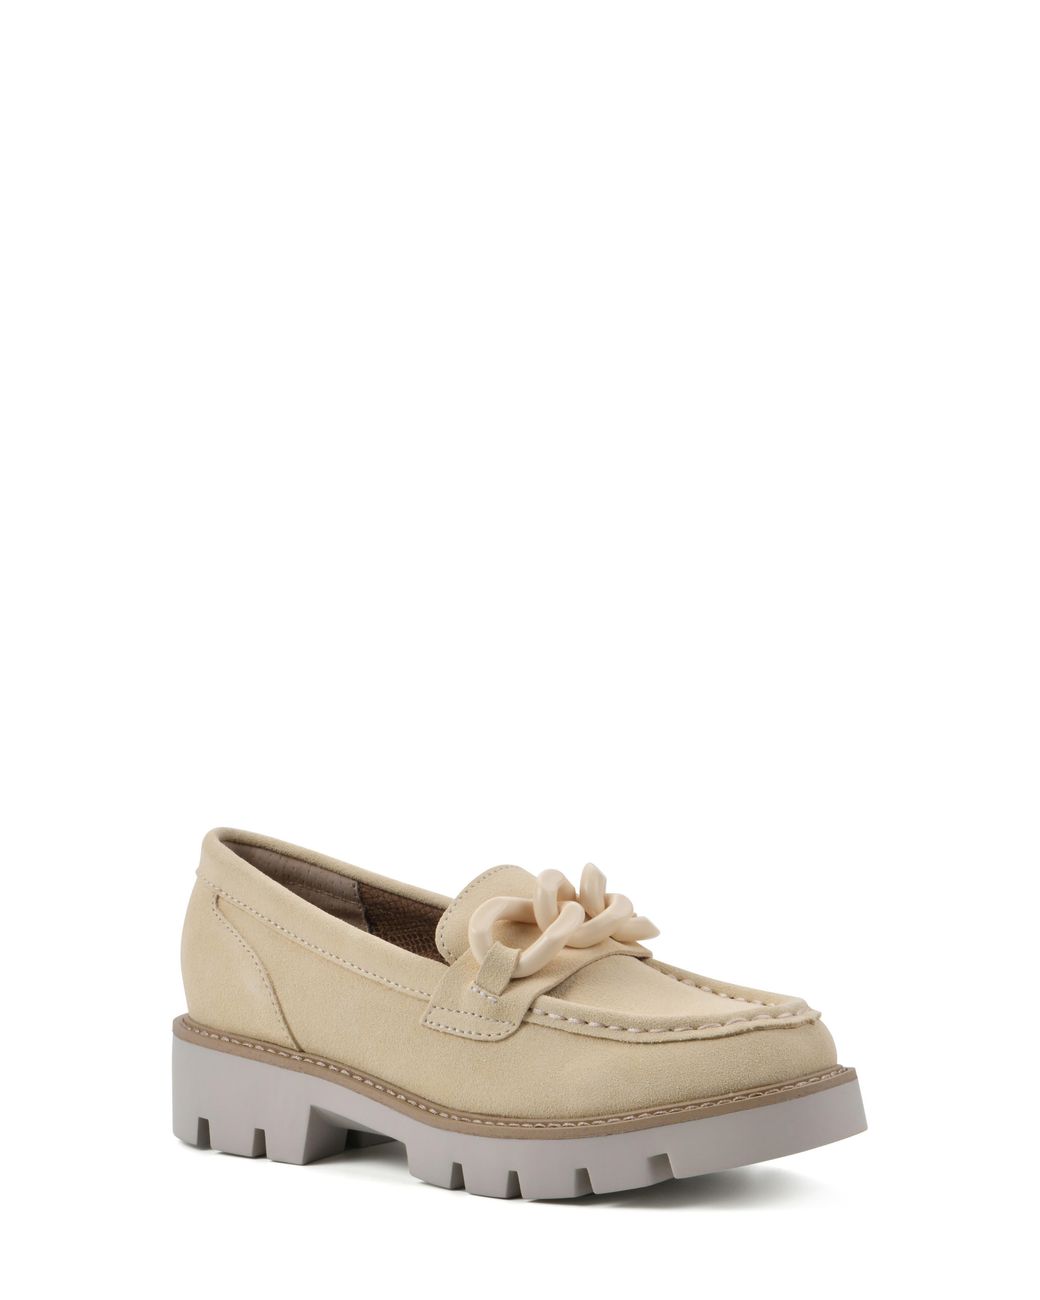 White Mountain Goodie Lug Sole Loafer in Natural | Lyst